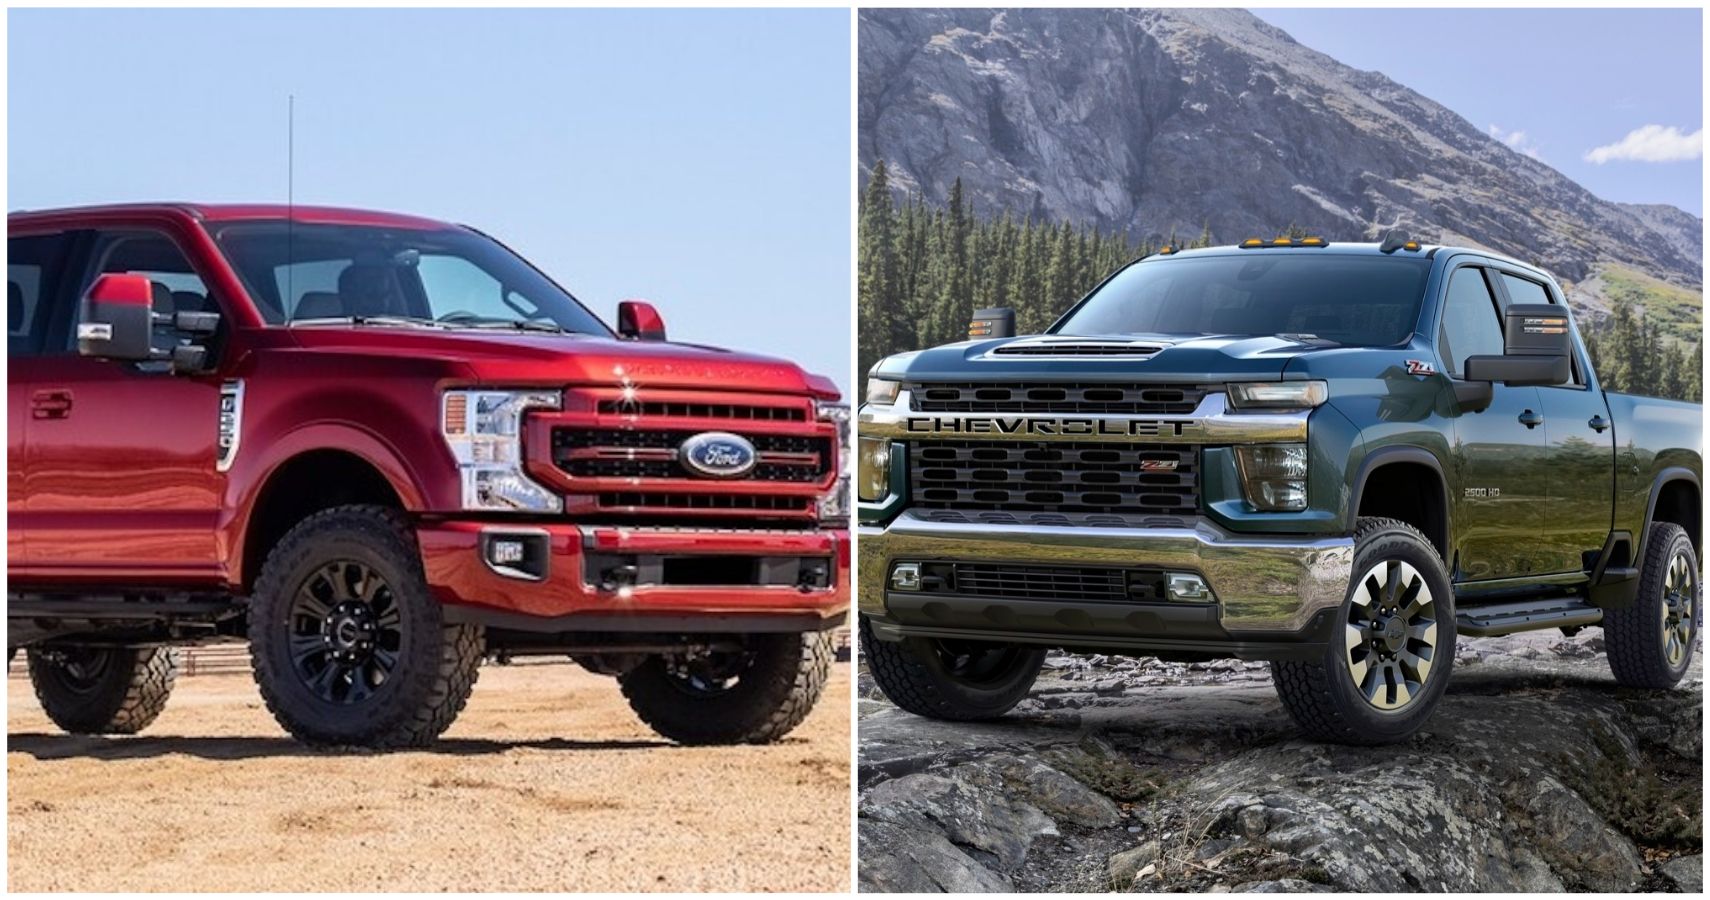 An Image Of A 2021 Ford F-250 Super Duty And A 2021 Chevy Silverado 2500 Side By Side